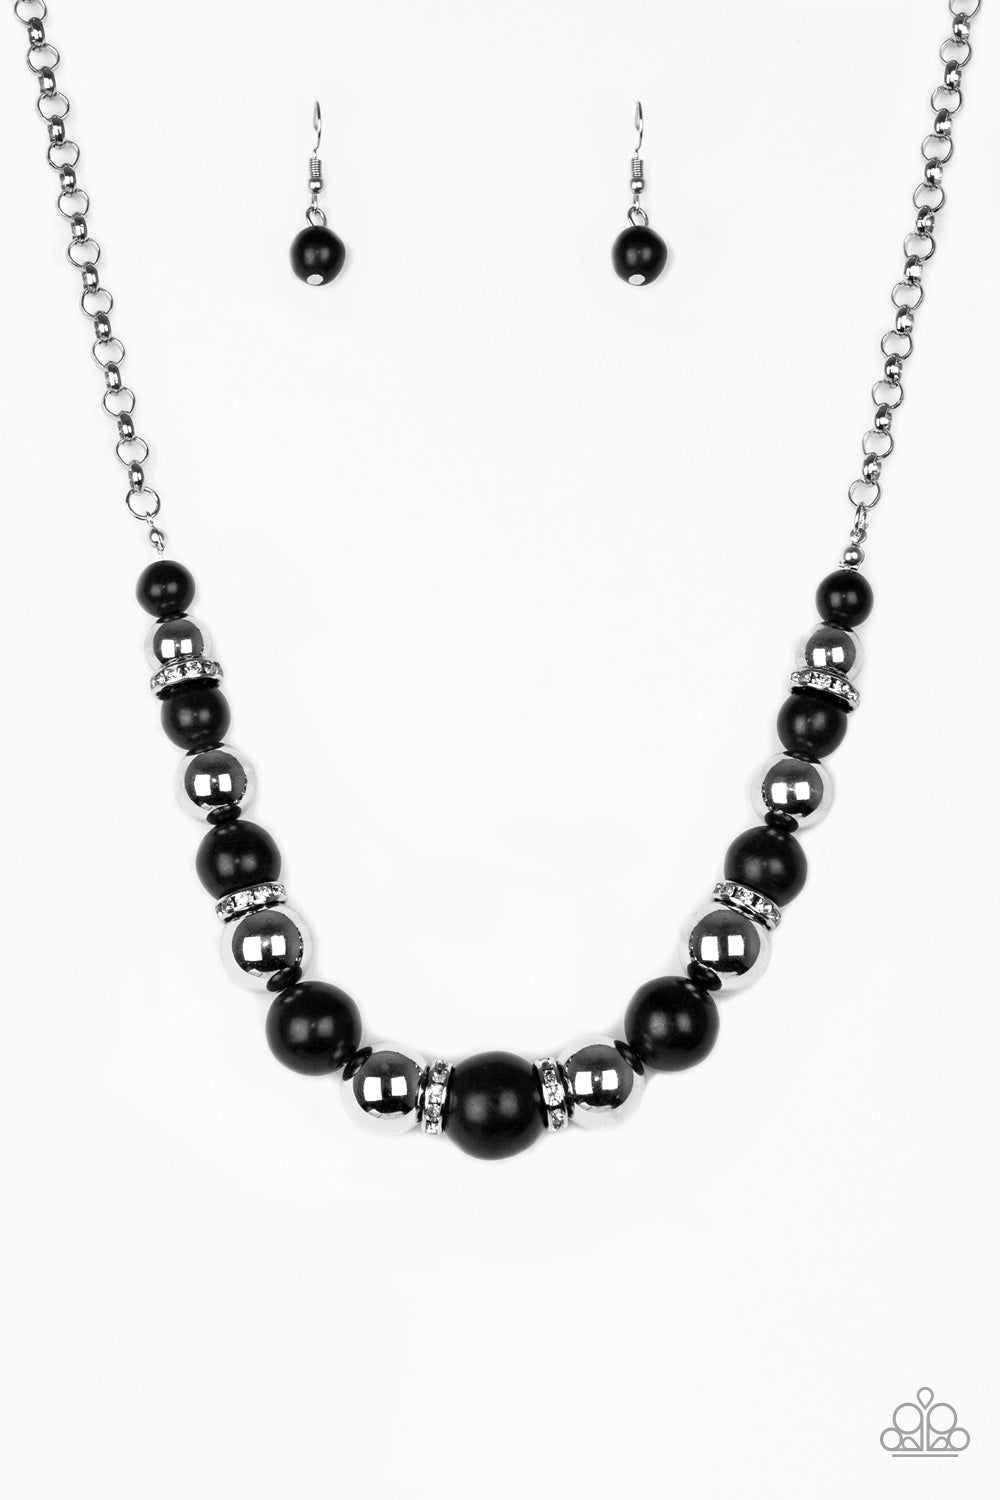 Paparazzi Accessories - The Ruling Class - Black & Silver Necklace